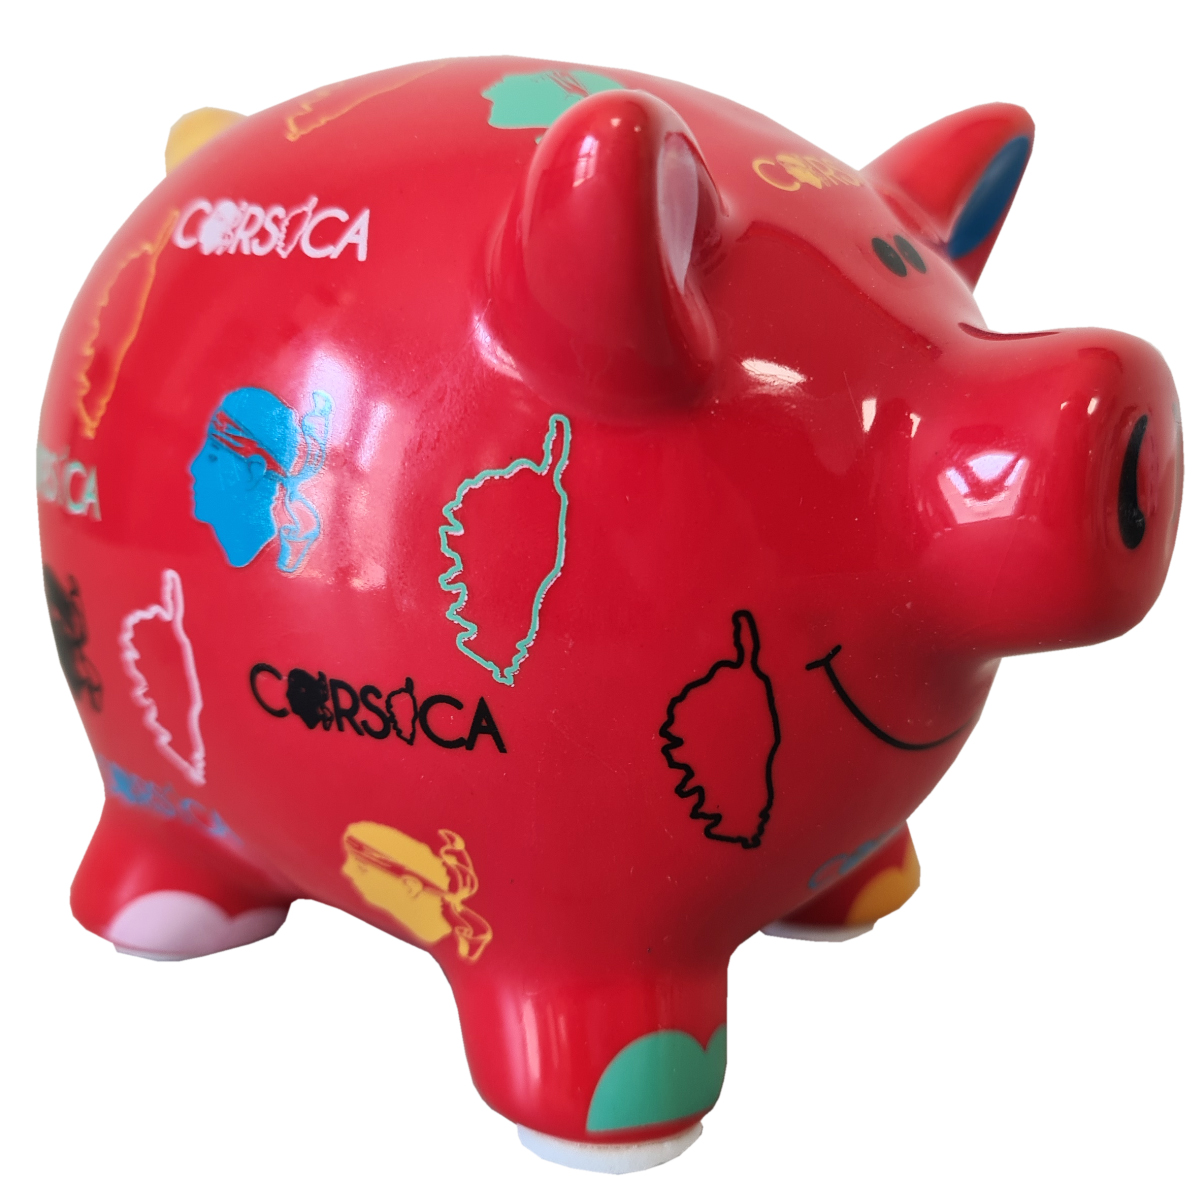 Small Corsican Piggy Bank - Red